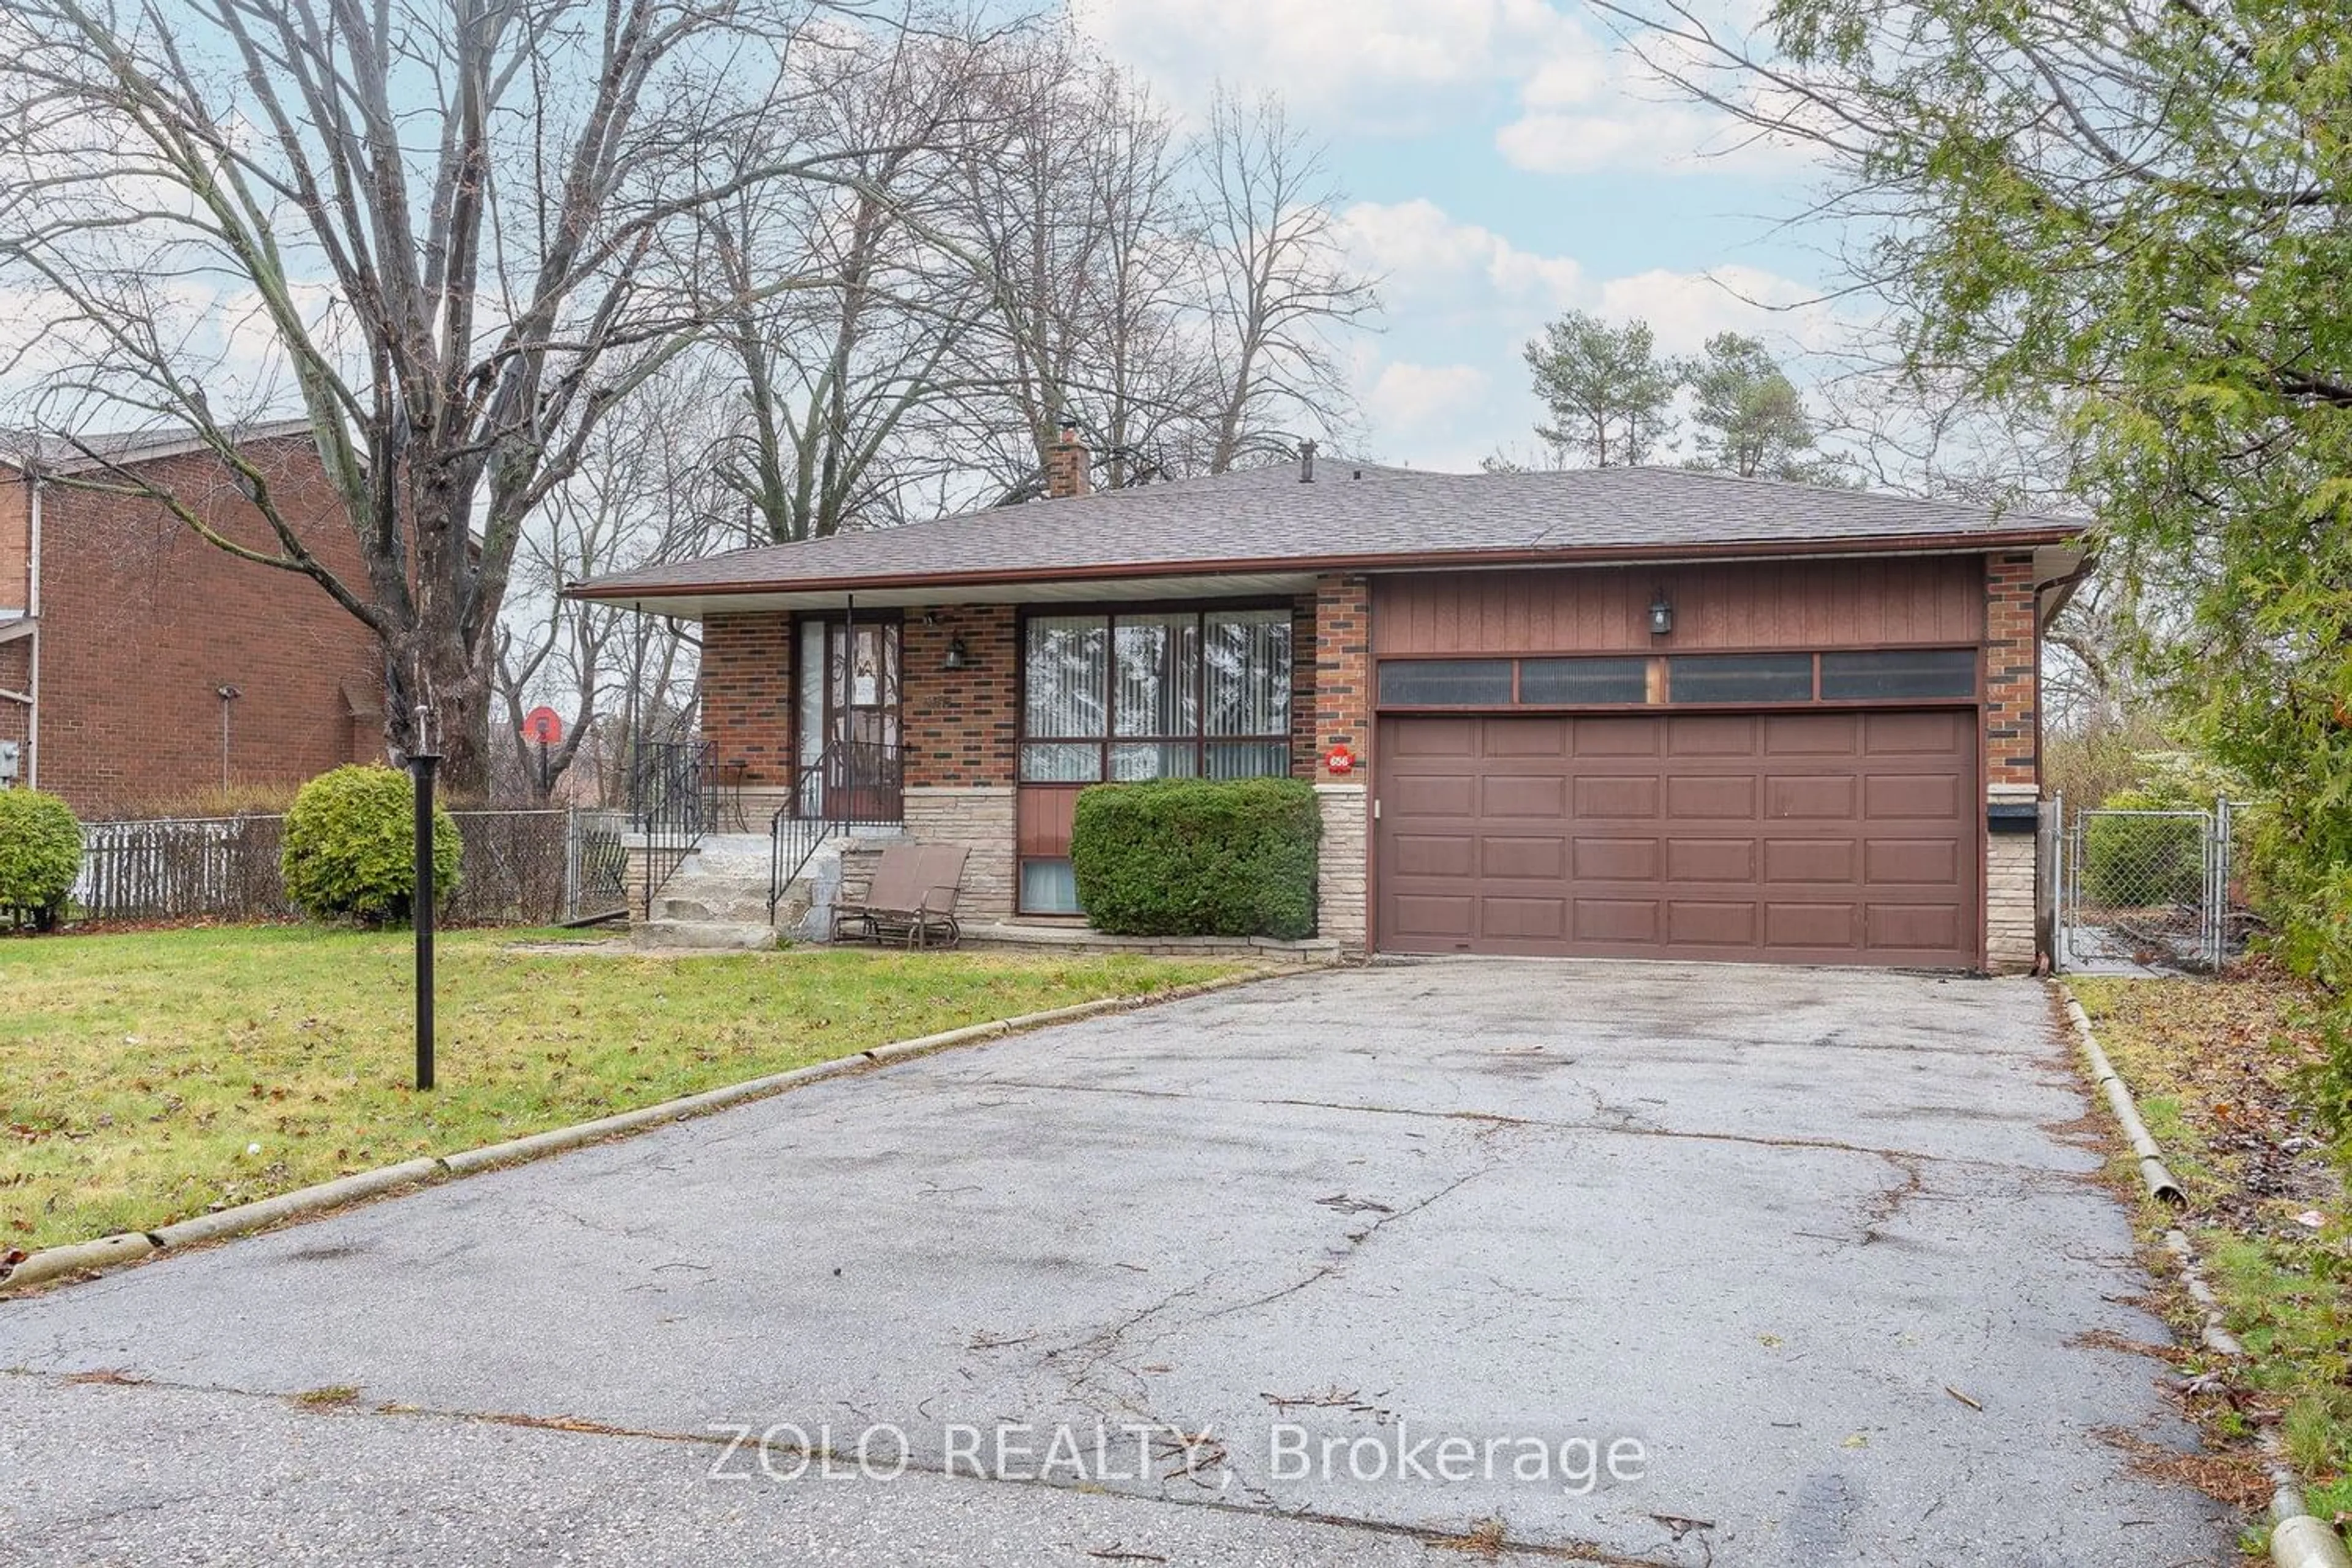 Home with brick exterior material for 656 Sheppard Ave, Pickering Ontario L1V 1G3